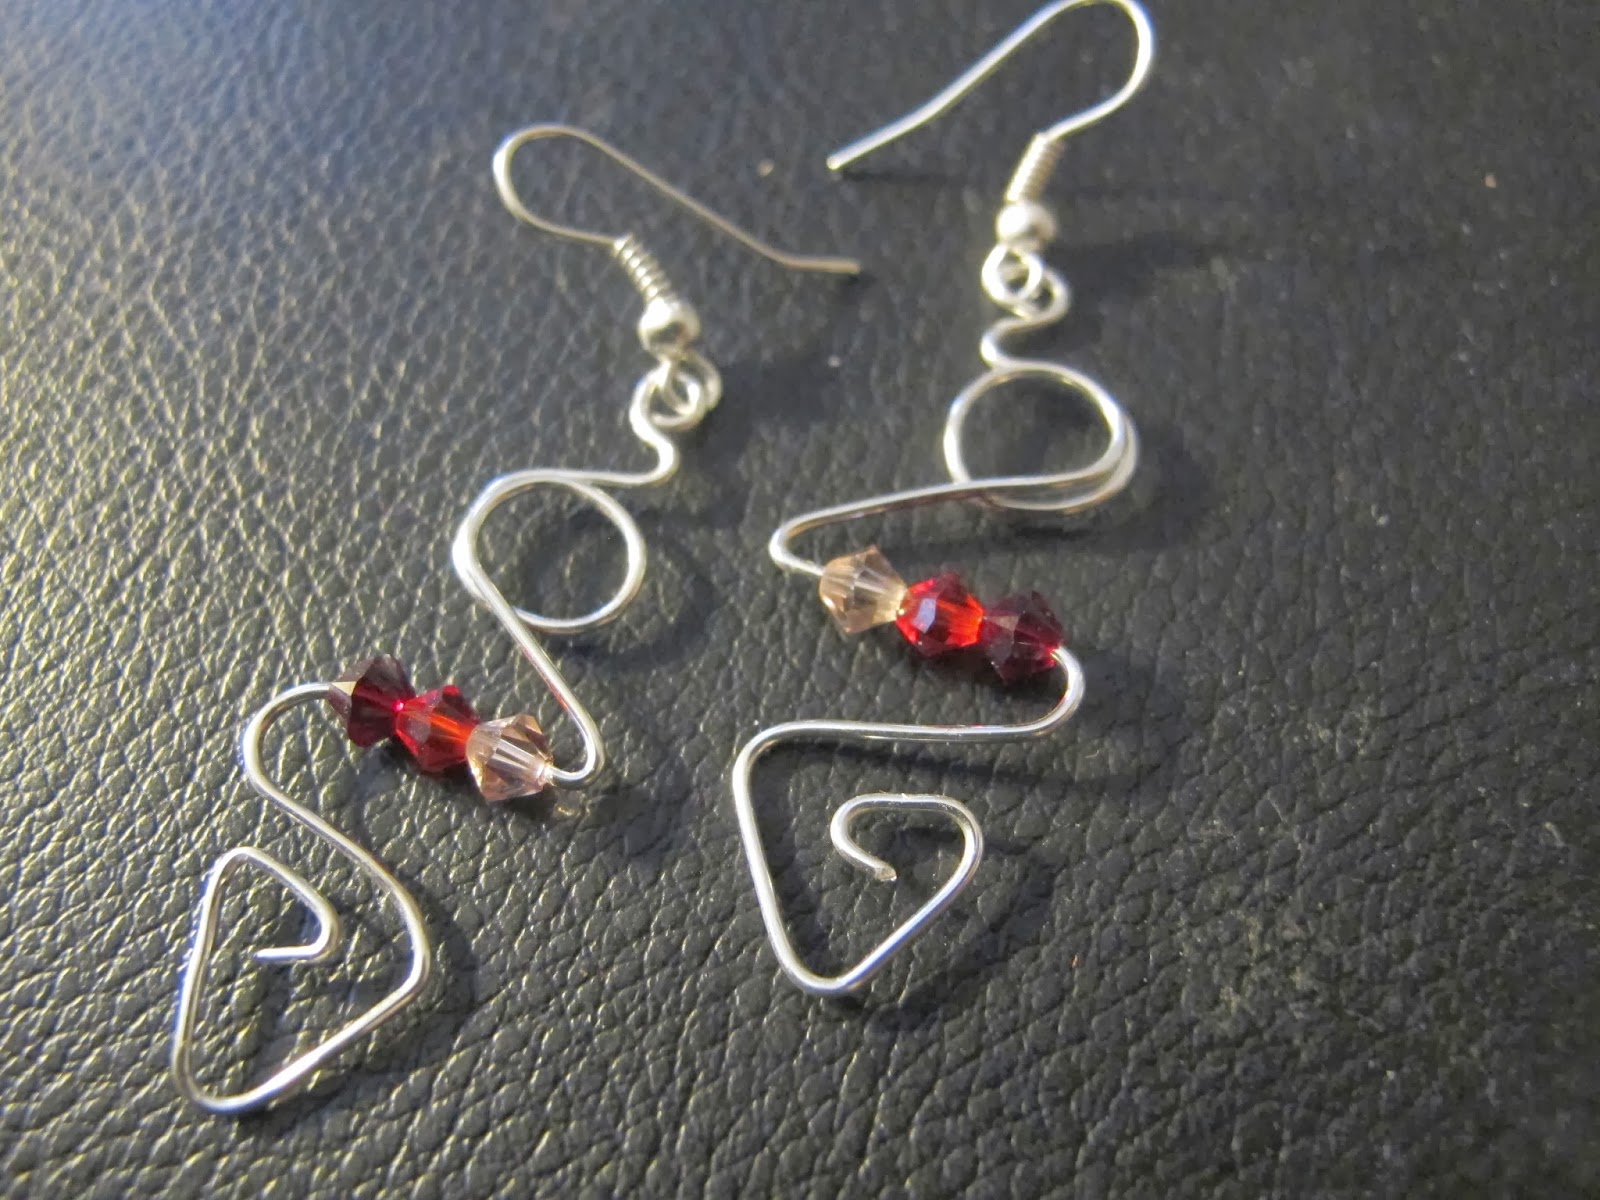 Naomi's Designs Handmade Wire Jewelry Yet more silver wire wrapped earring designs with